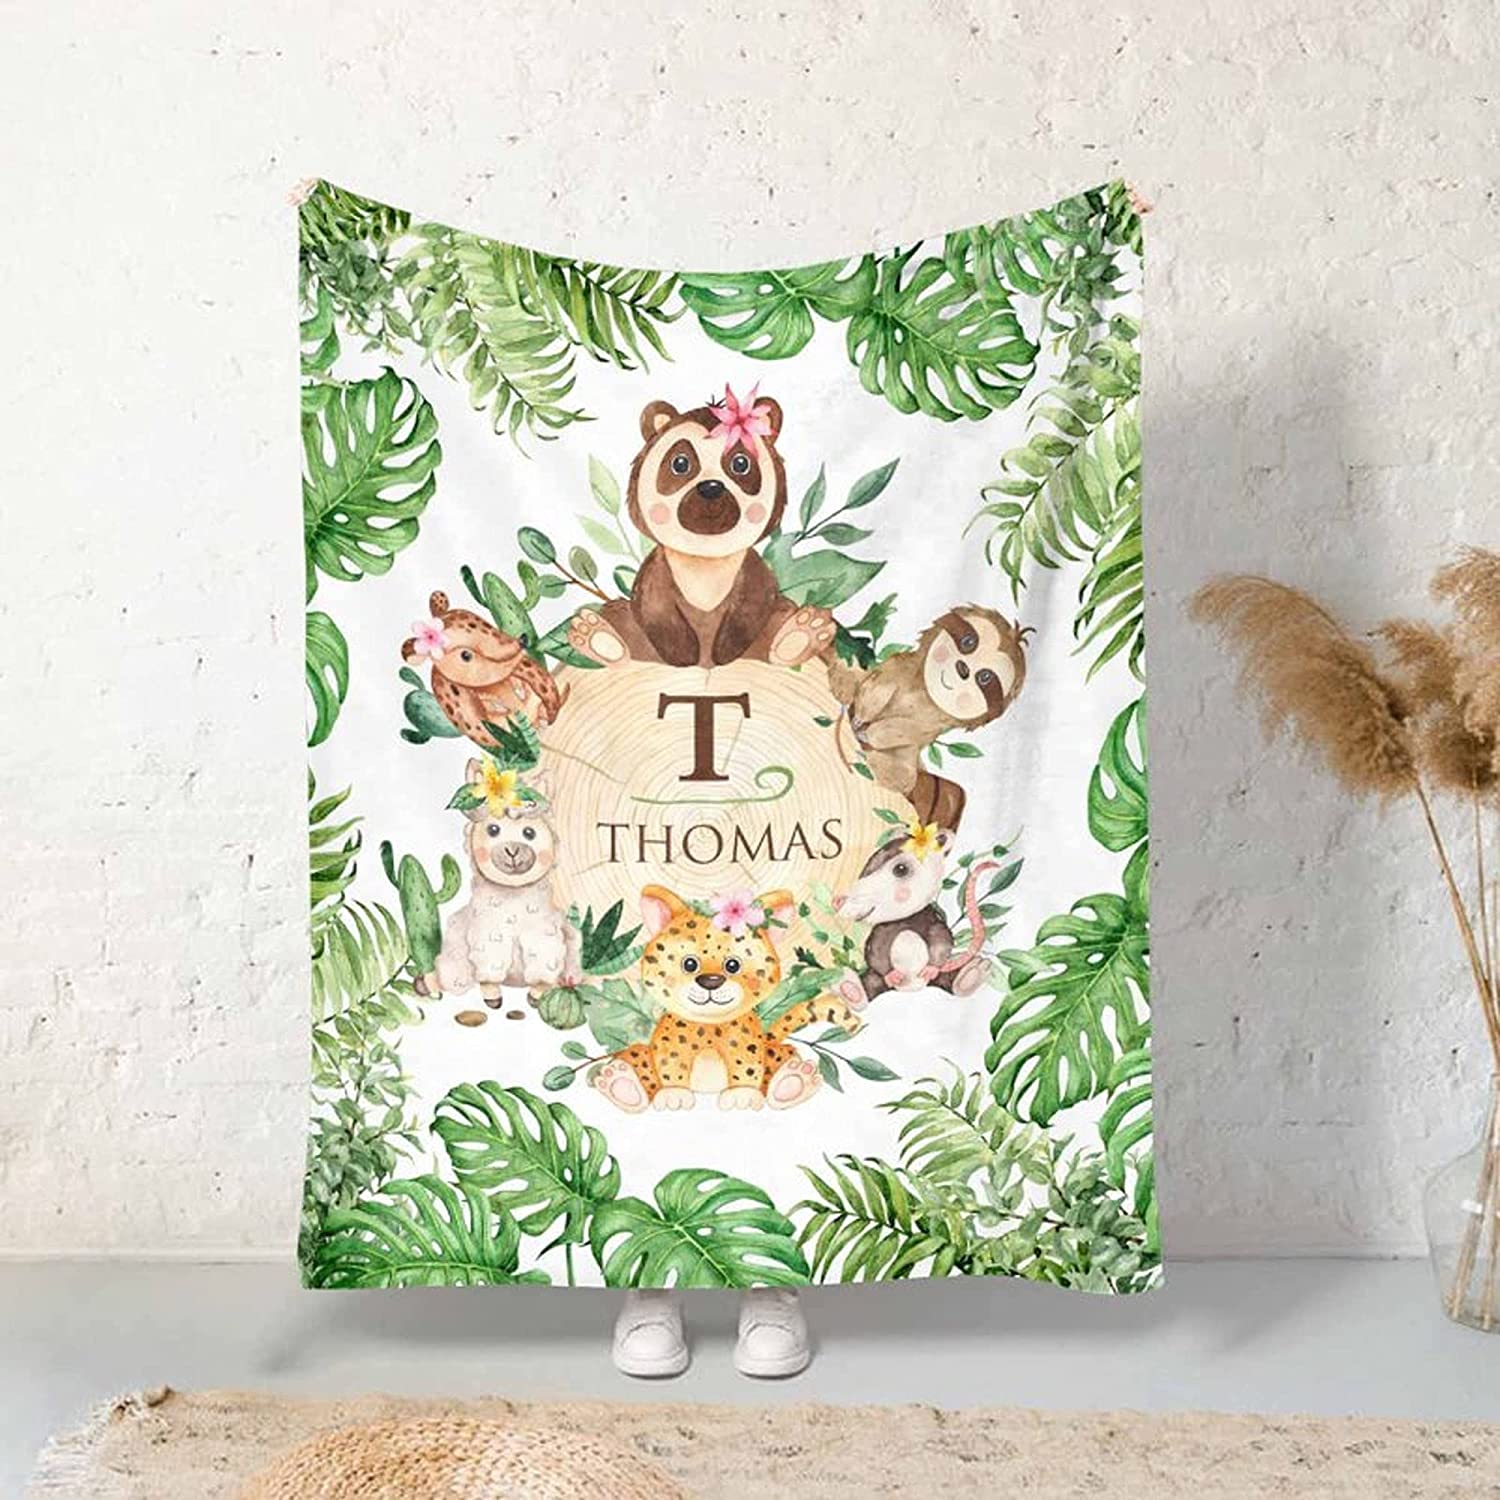 Custom Blanket for Baby Boys Girls Kawaii Animal Personalized Blankets, Gifts for Kids 30x40